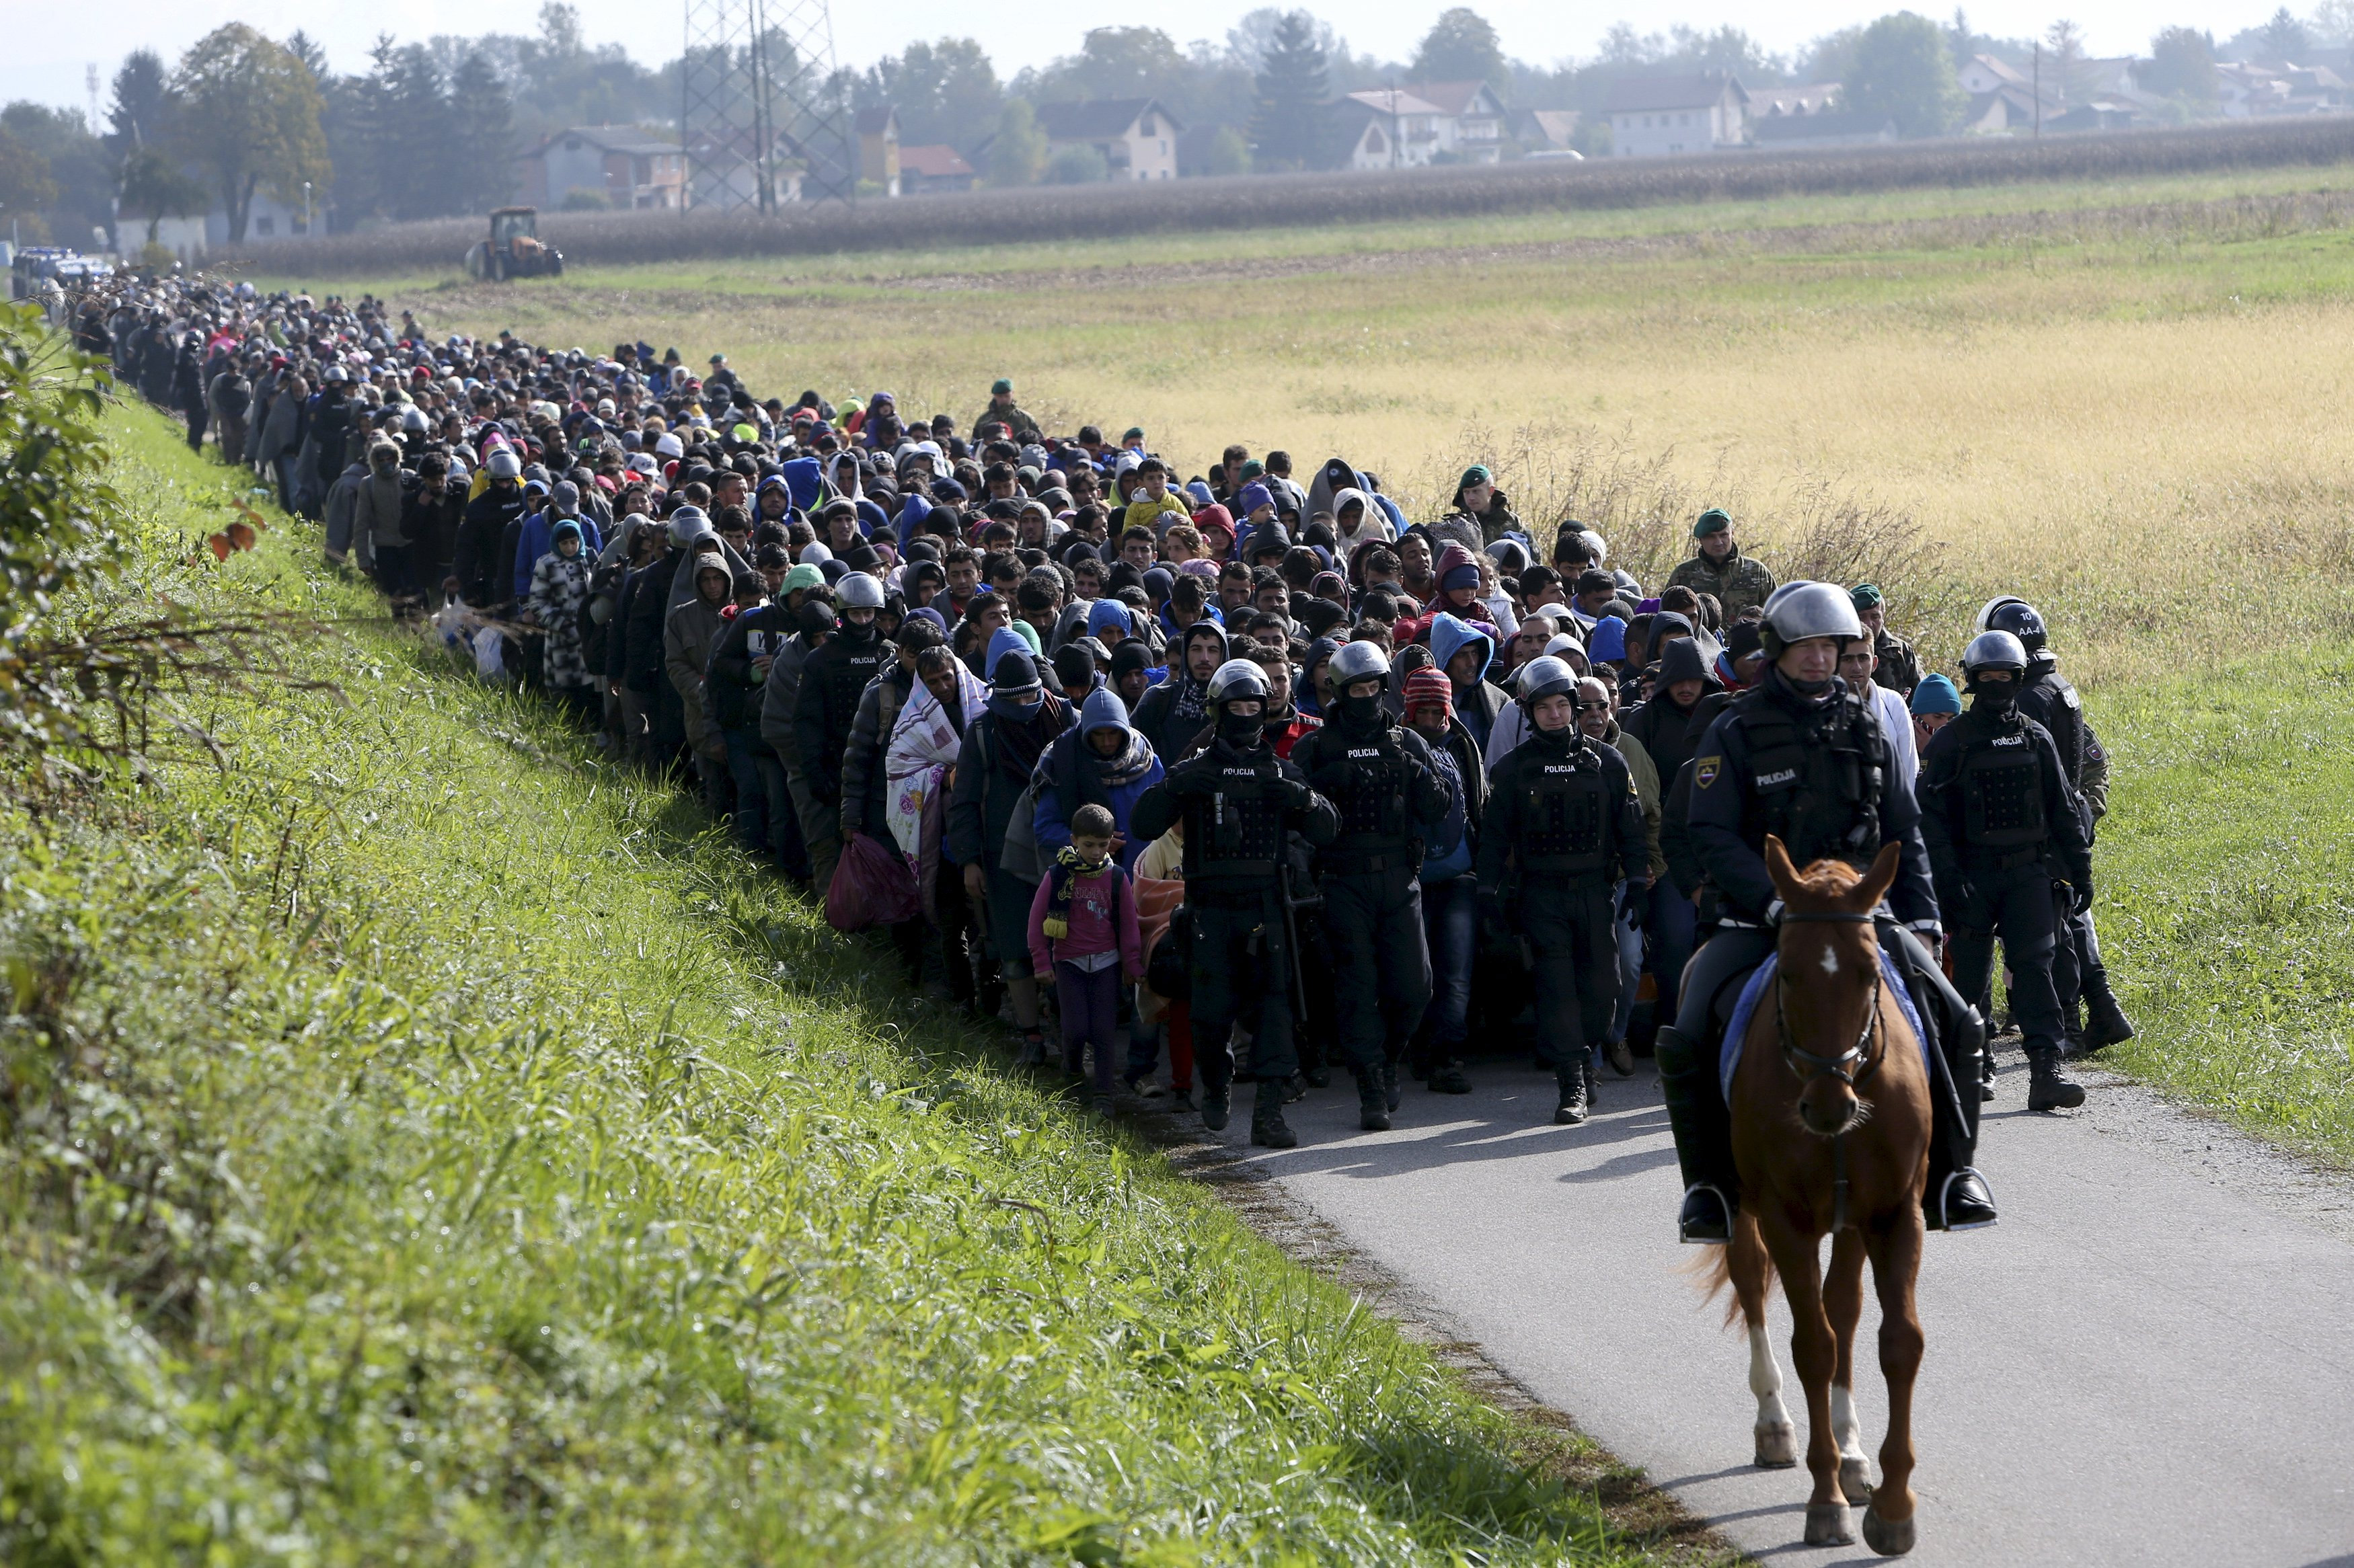 A mounted policeman leads a group of migrants near Dobova, Slovenia in this October 20, 2015 file photo. To match EUROPE-MIGRANTS/ECONOMY REUTERS/Srdjan Zivulovic/Files